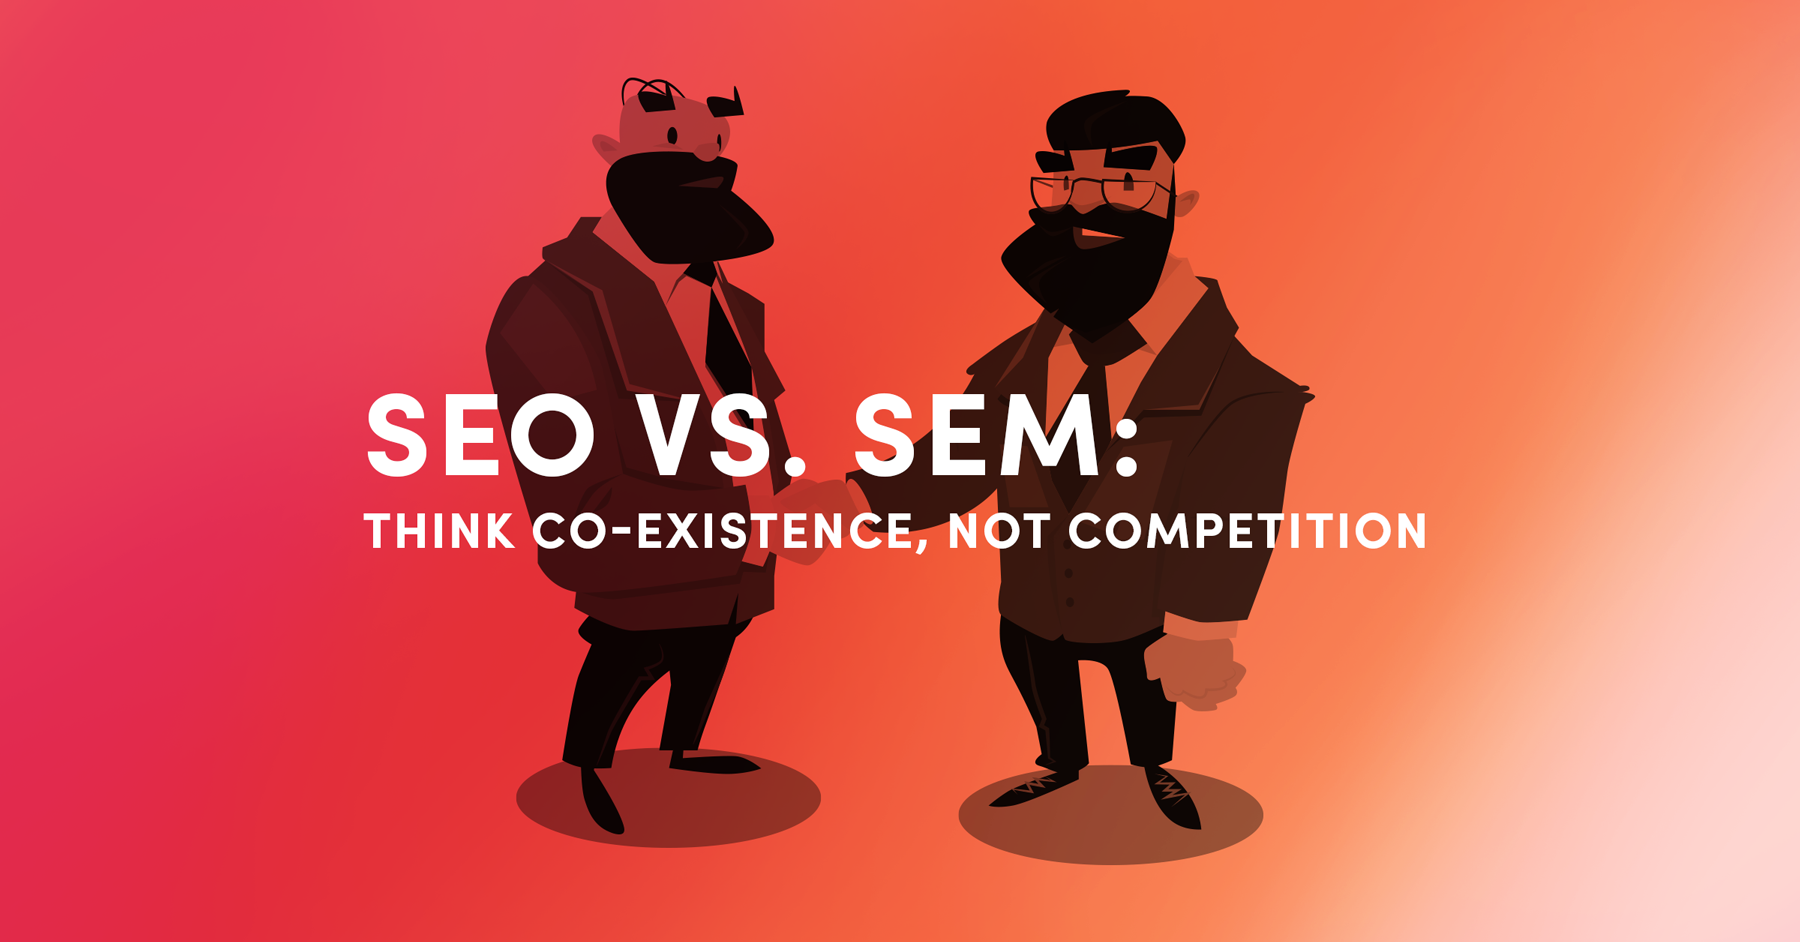 SEO vs SEM think co-existence, not competition